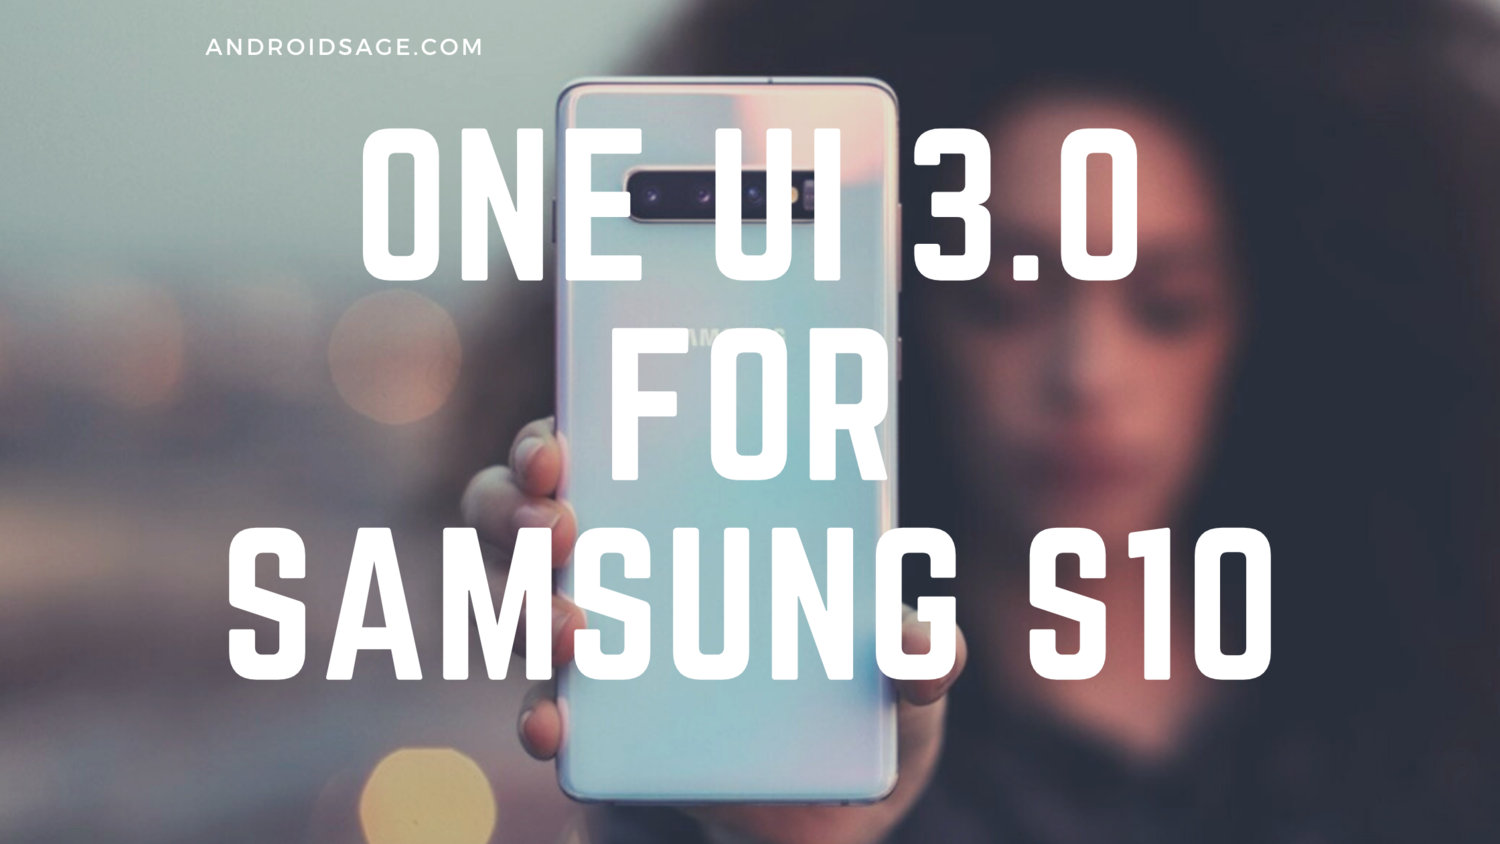 One UI 3.0 for Samsung Galaxy S10 series